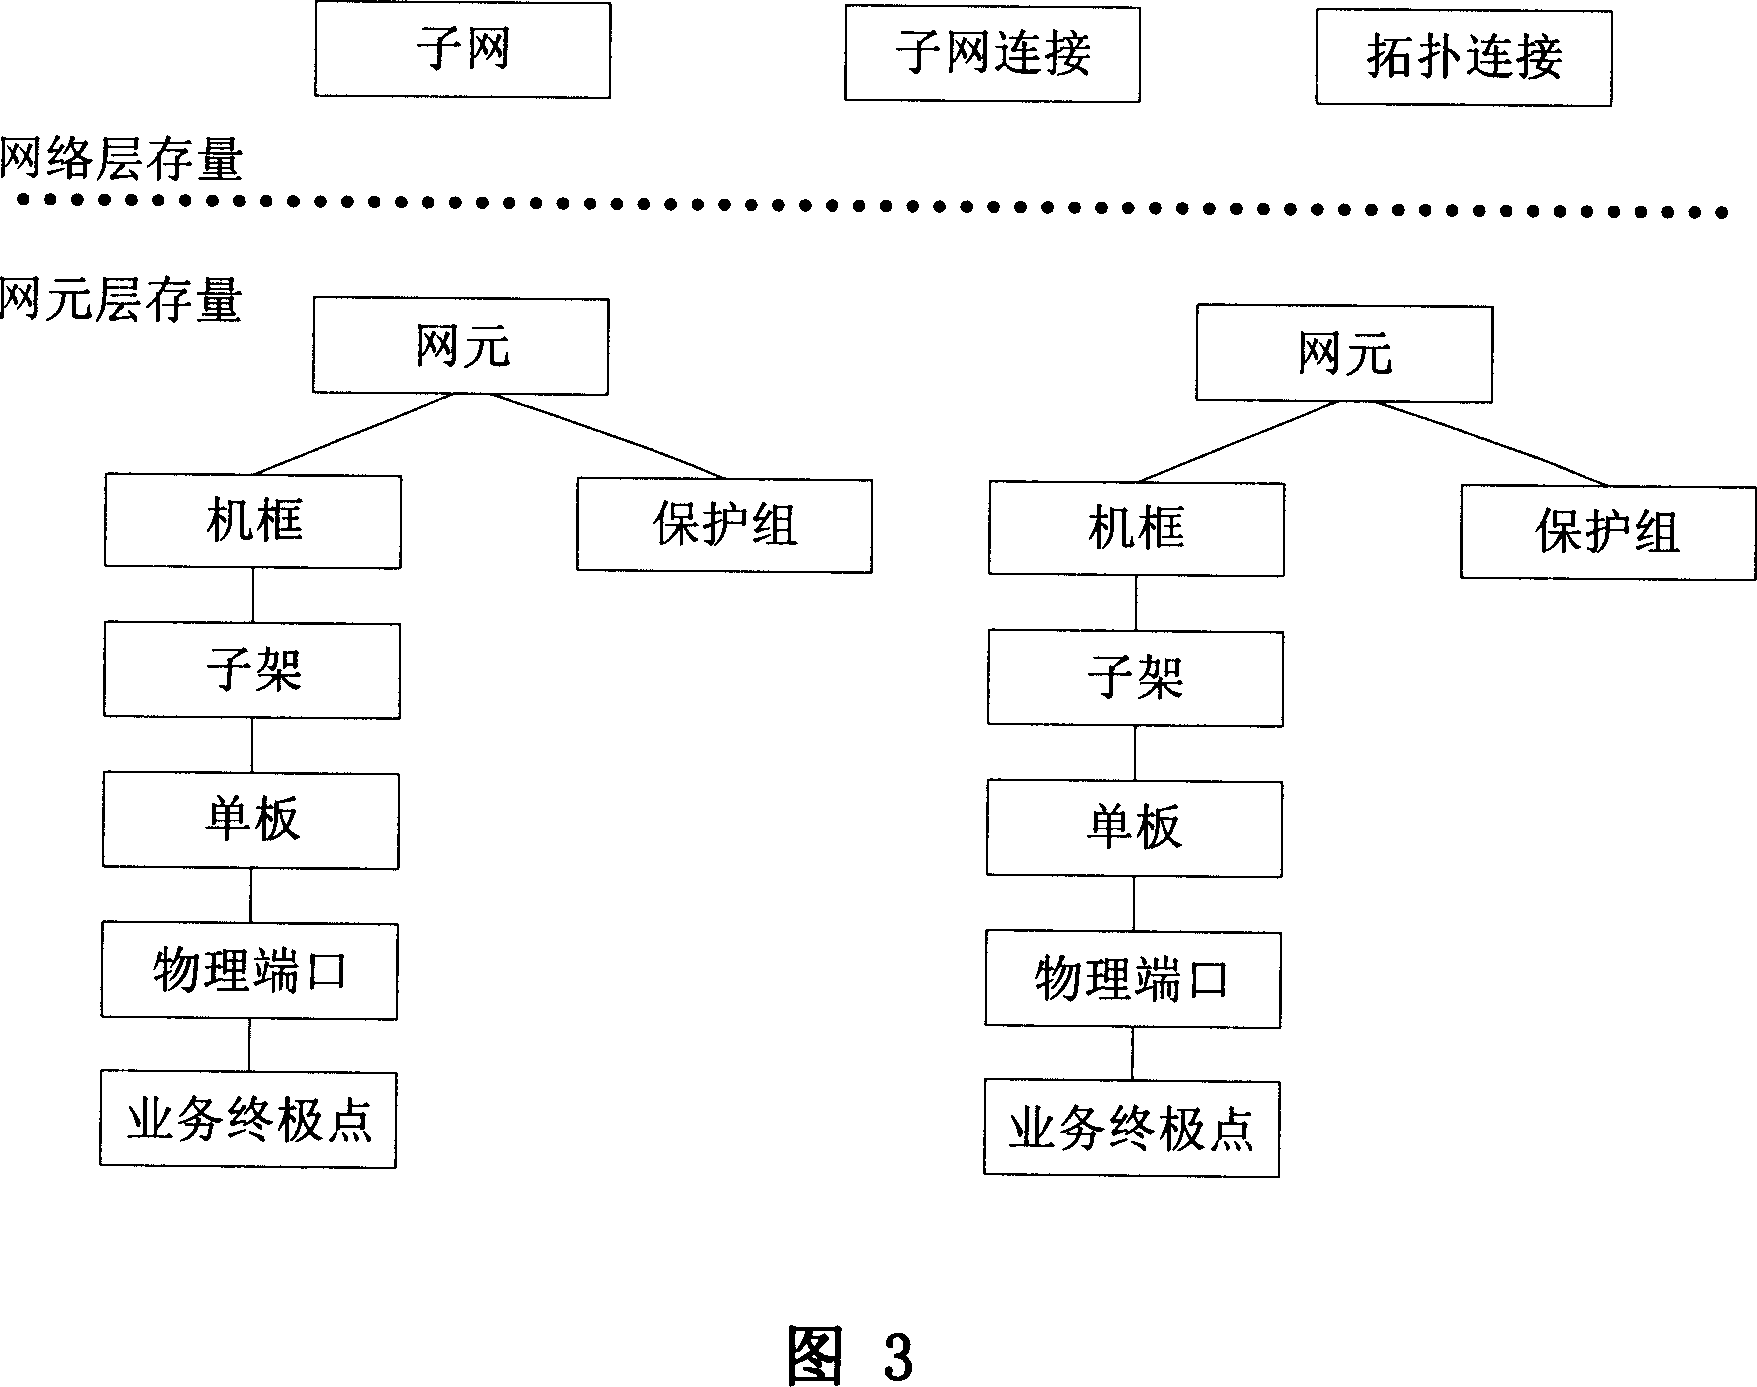 Multi-stage network administration system and method for processing northward interface in it